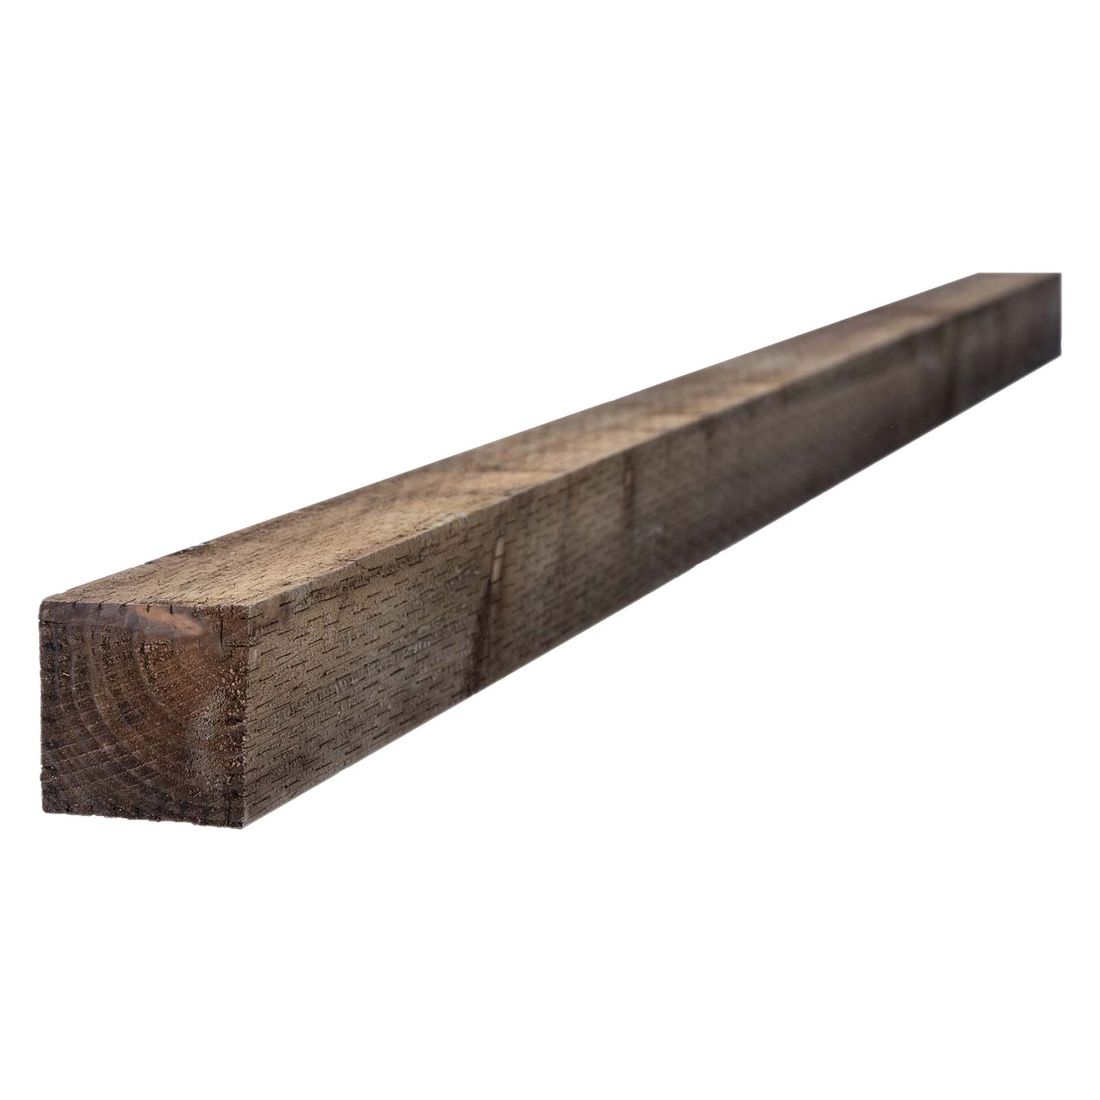 Incised Fence Post Treated Brown 75 X 75 3 X 3 2.4M Fsc